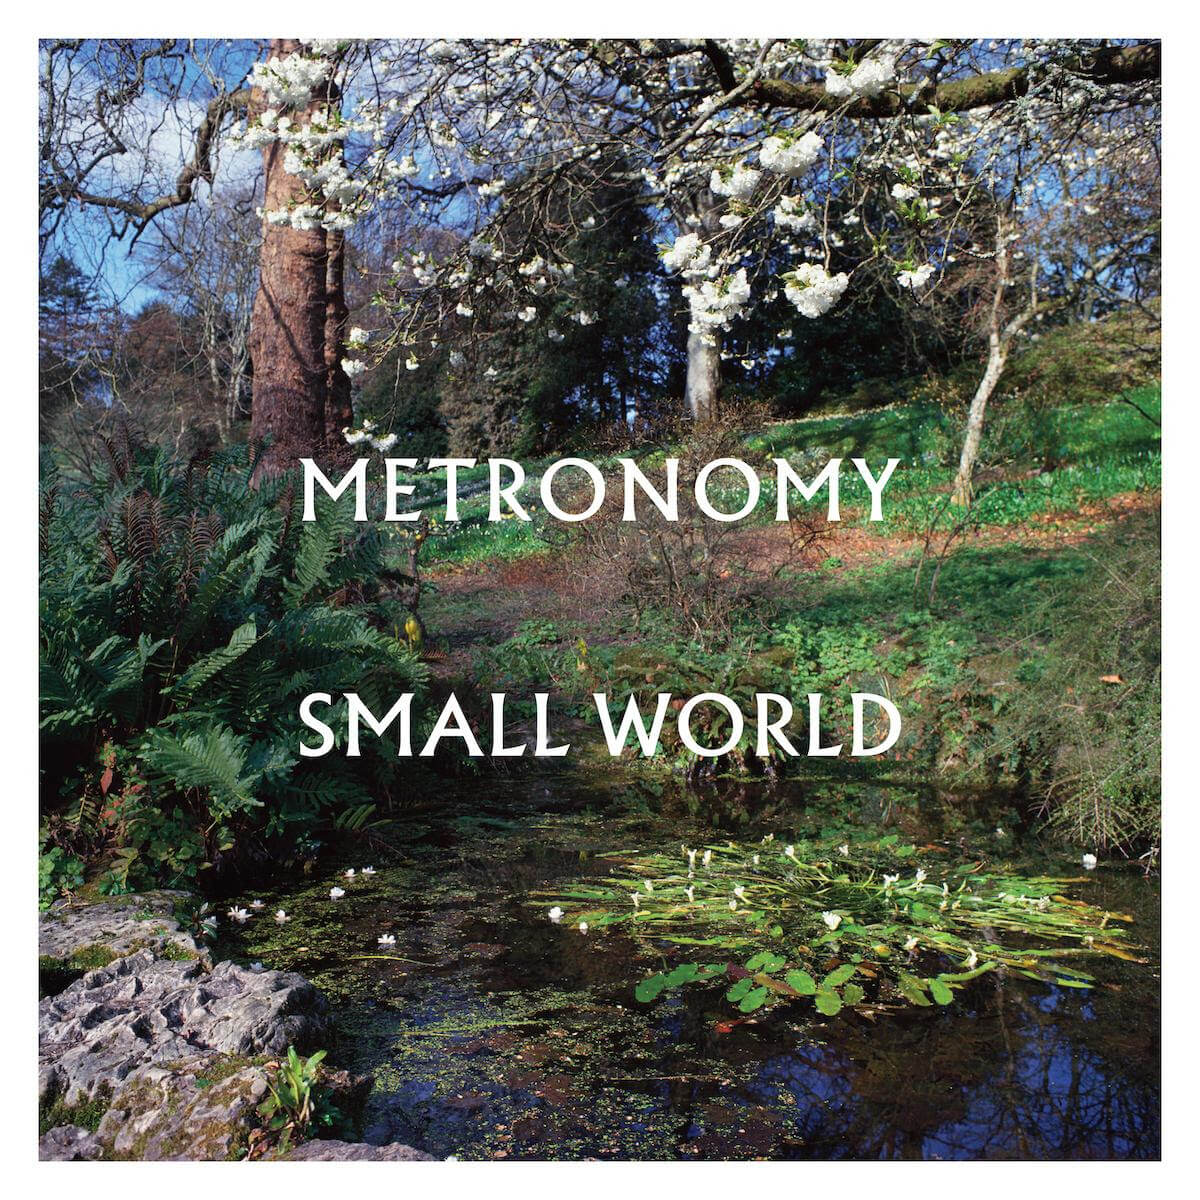 Small World by Metronomy Album Review by Adam Williams, the full-length by the UK group, drops on February 18, 2022 via Because Music